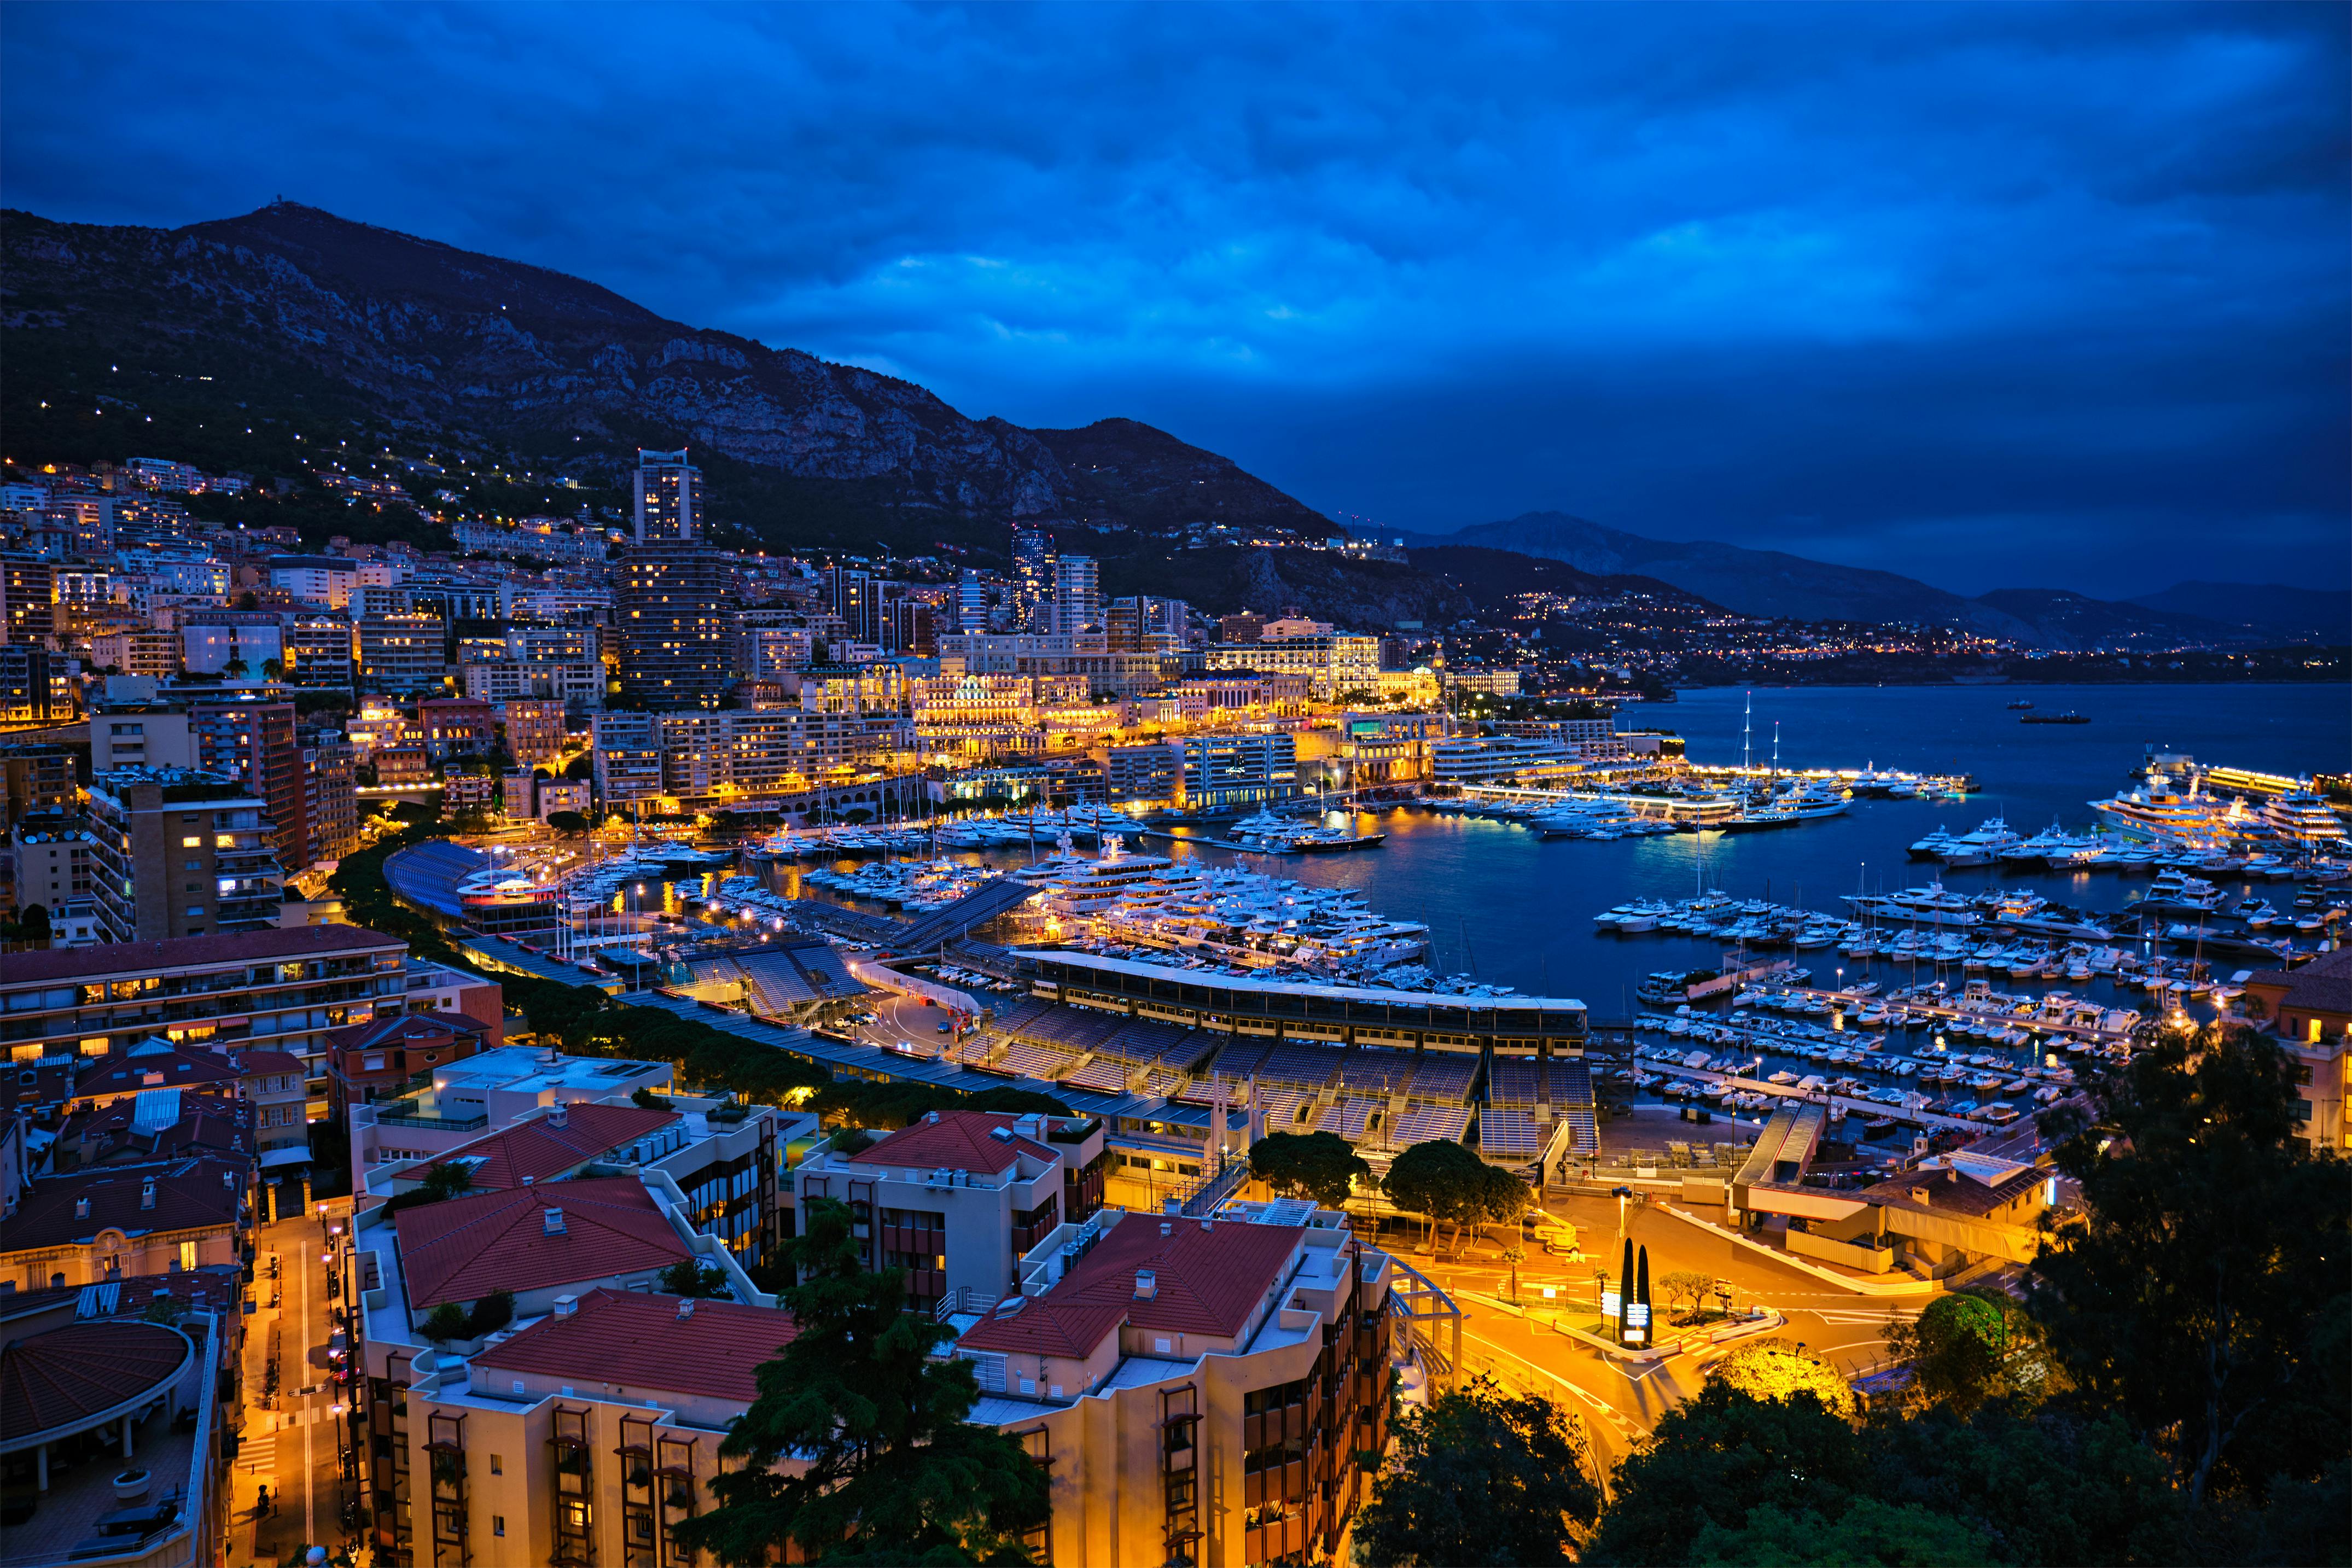 Tour of Monaco by night from Nice